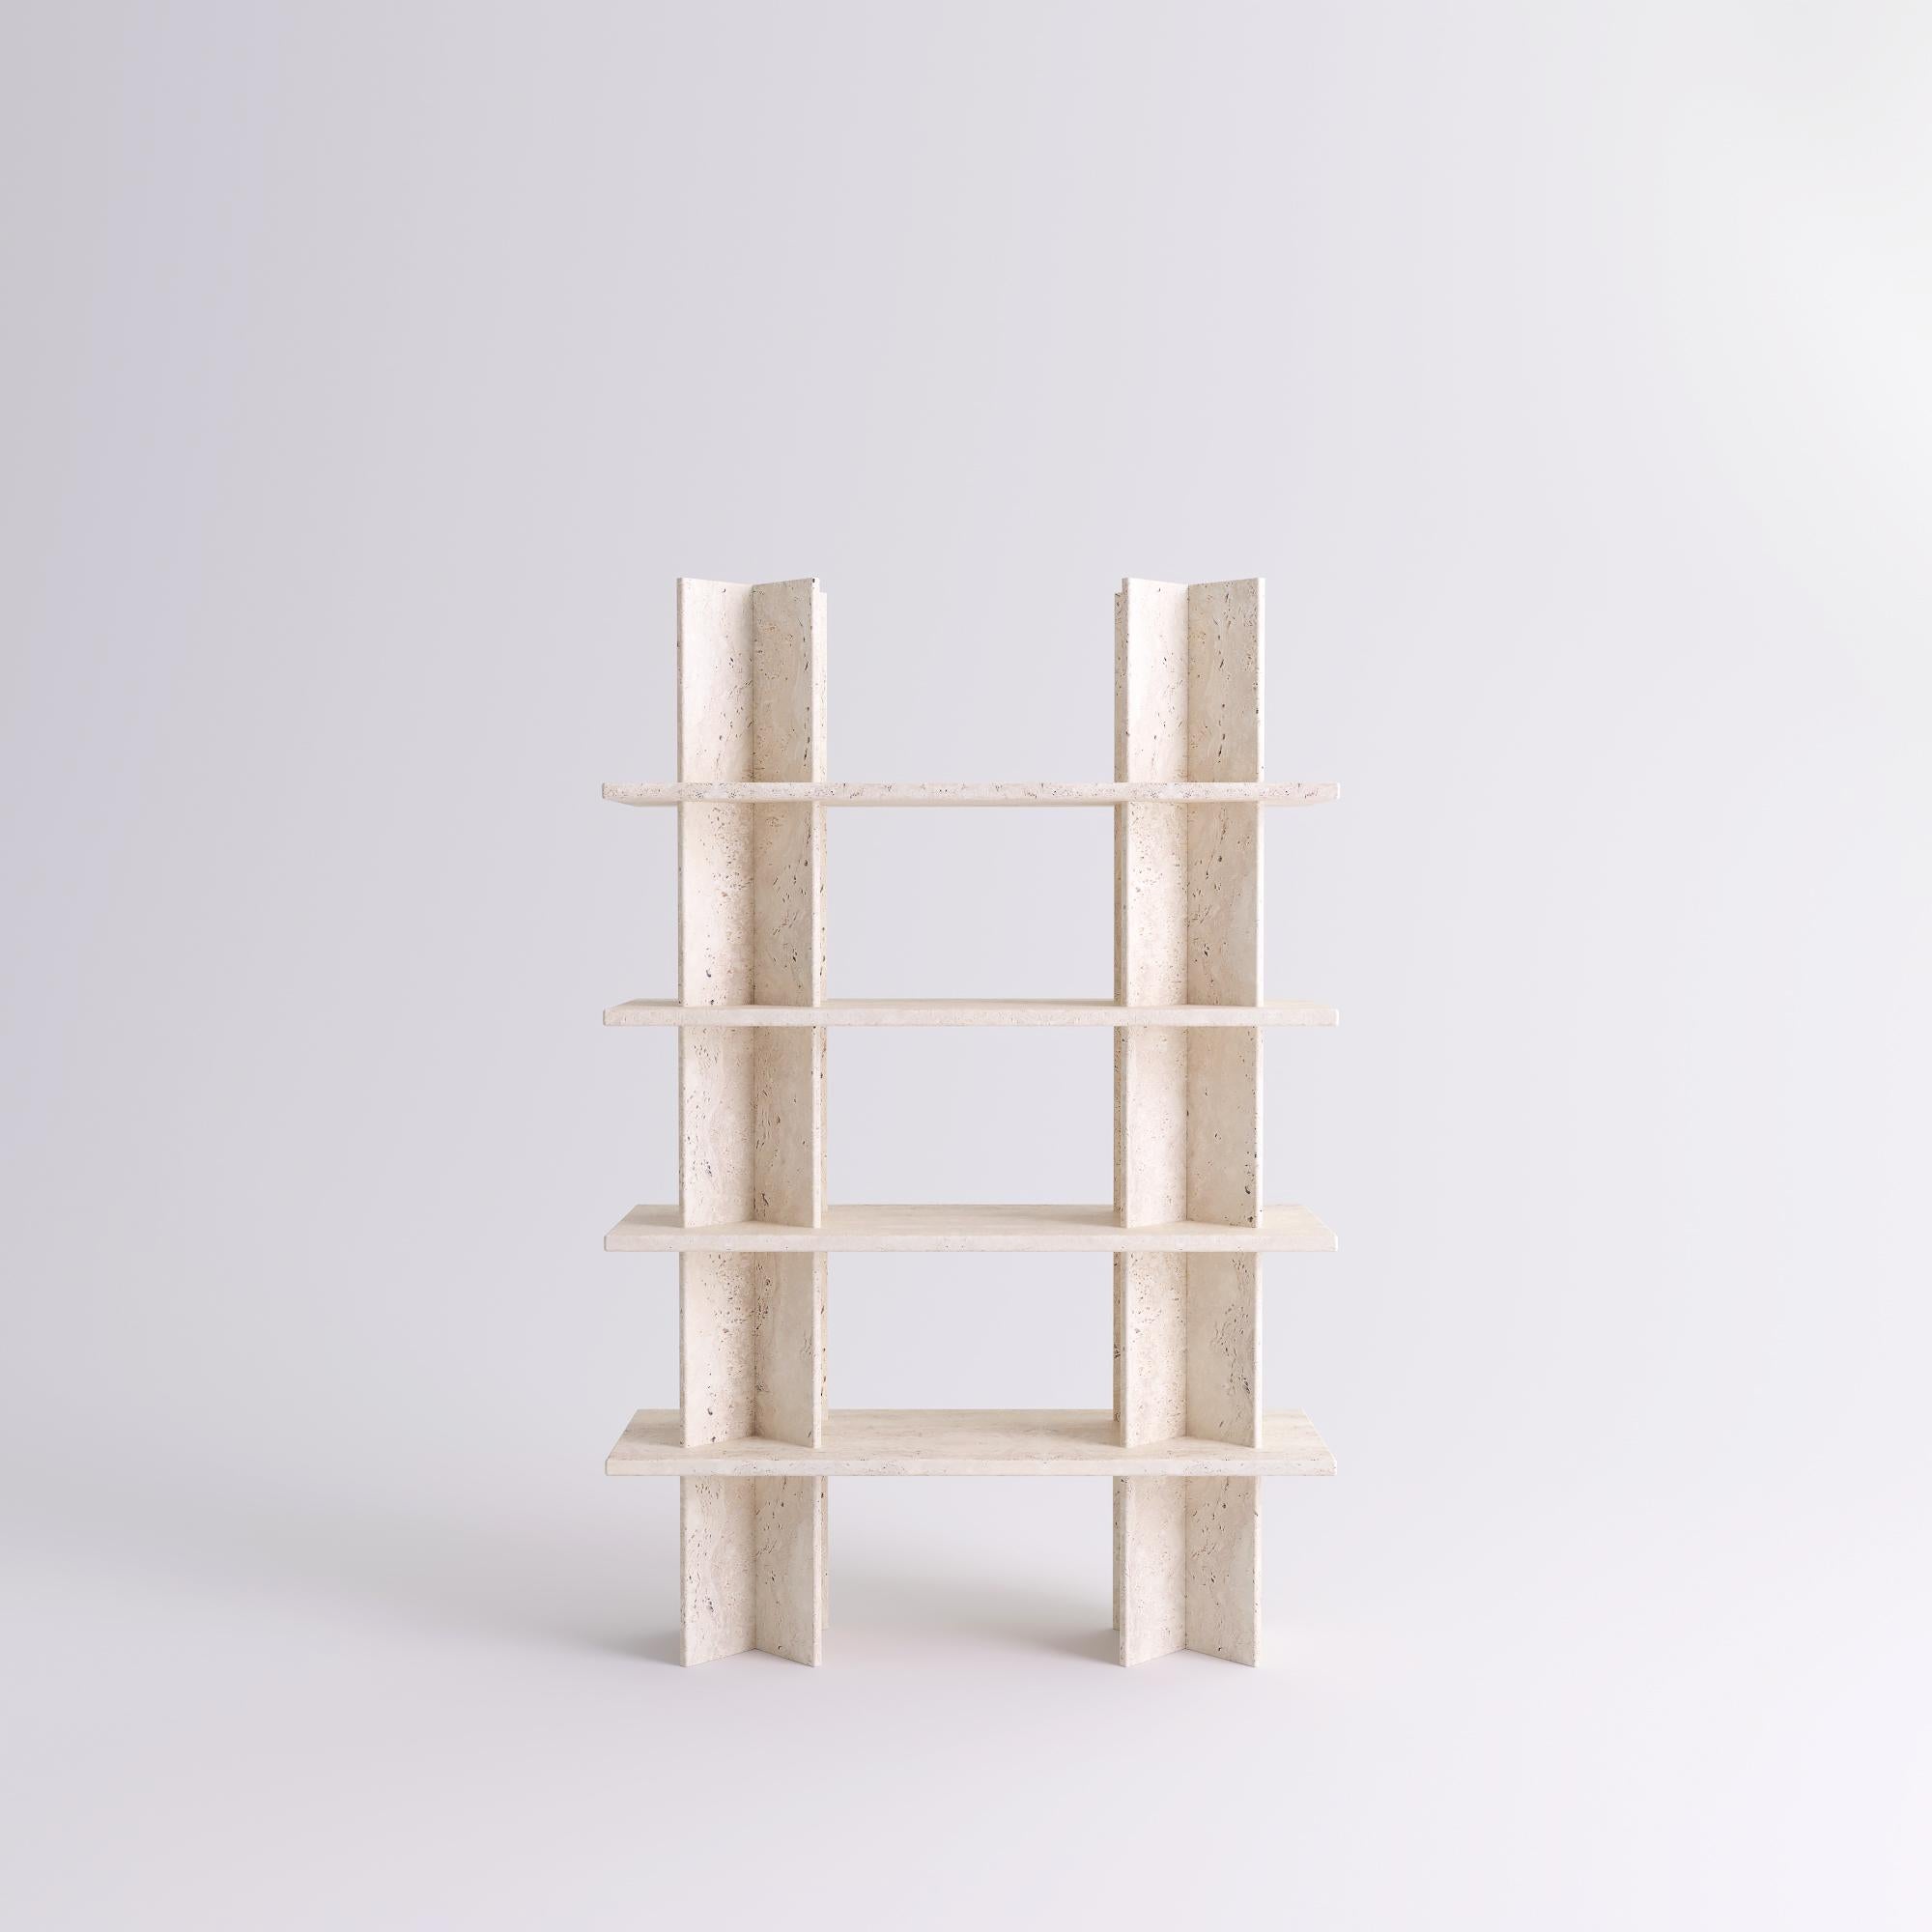 Monument travertine shelves by Mathieu Girard & Gauthier Pouillart
Dimensions: L 130 x H 117
Materials: white travertine shelves and columns 
Material available: Birchwood, white marble, green marble, black marble, Pele de tigre marble,